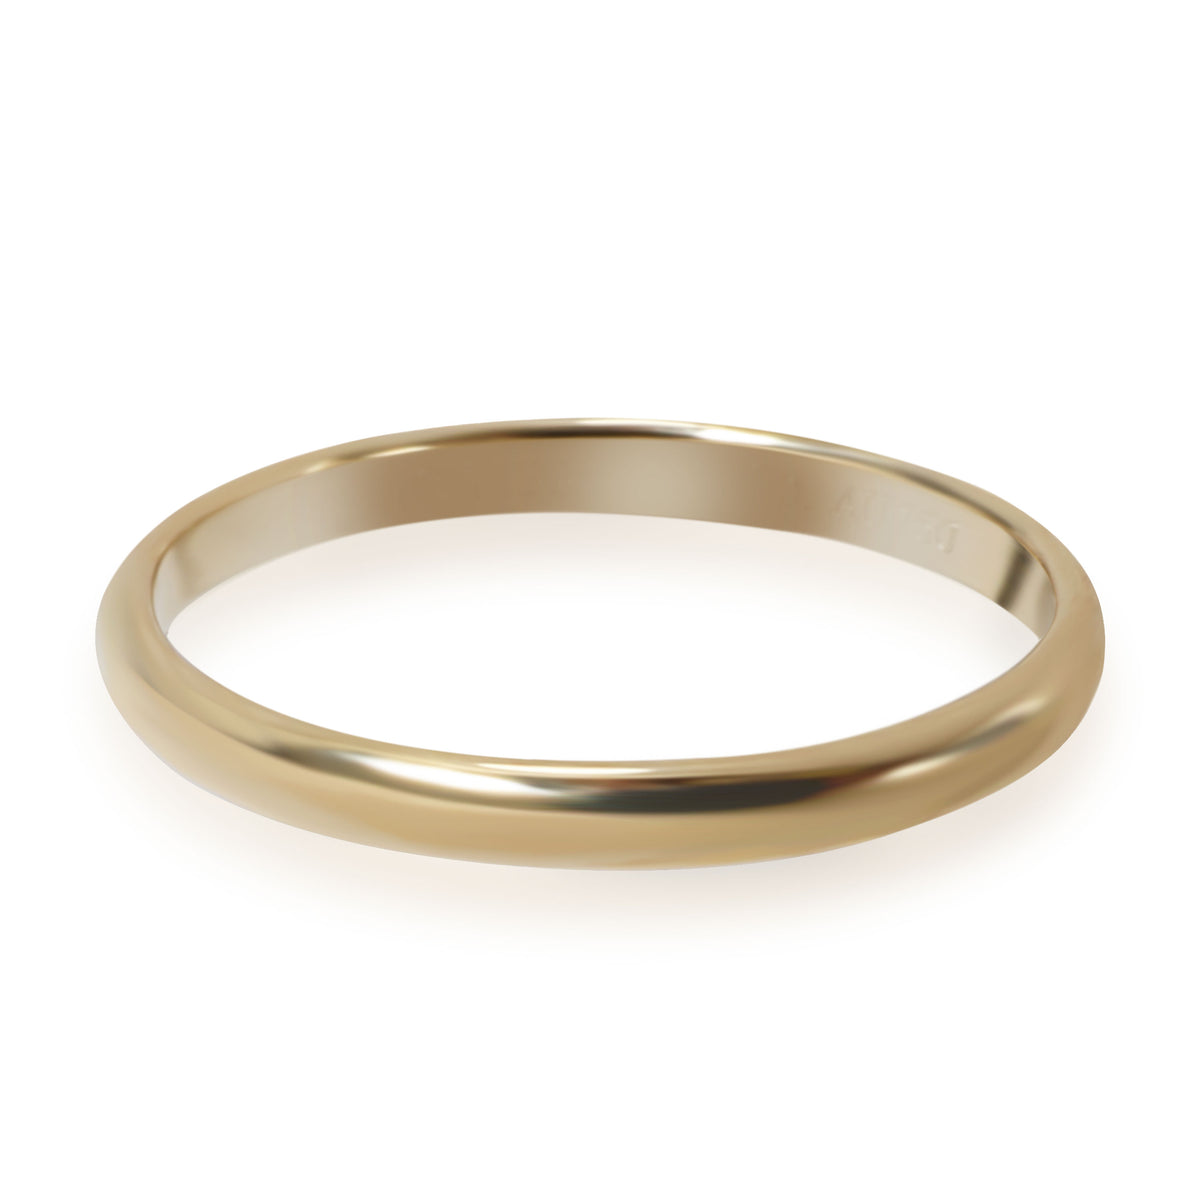 Tiffany & Co. Classic Wedding Band in 18K Yellow Gold